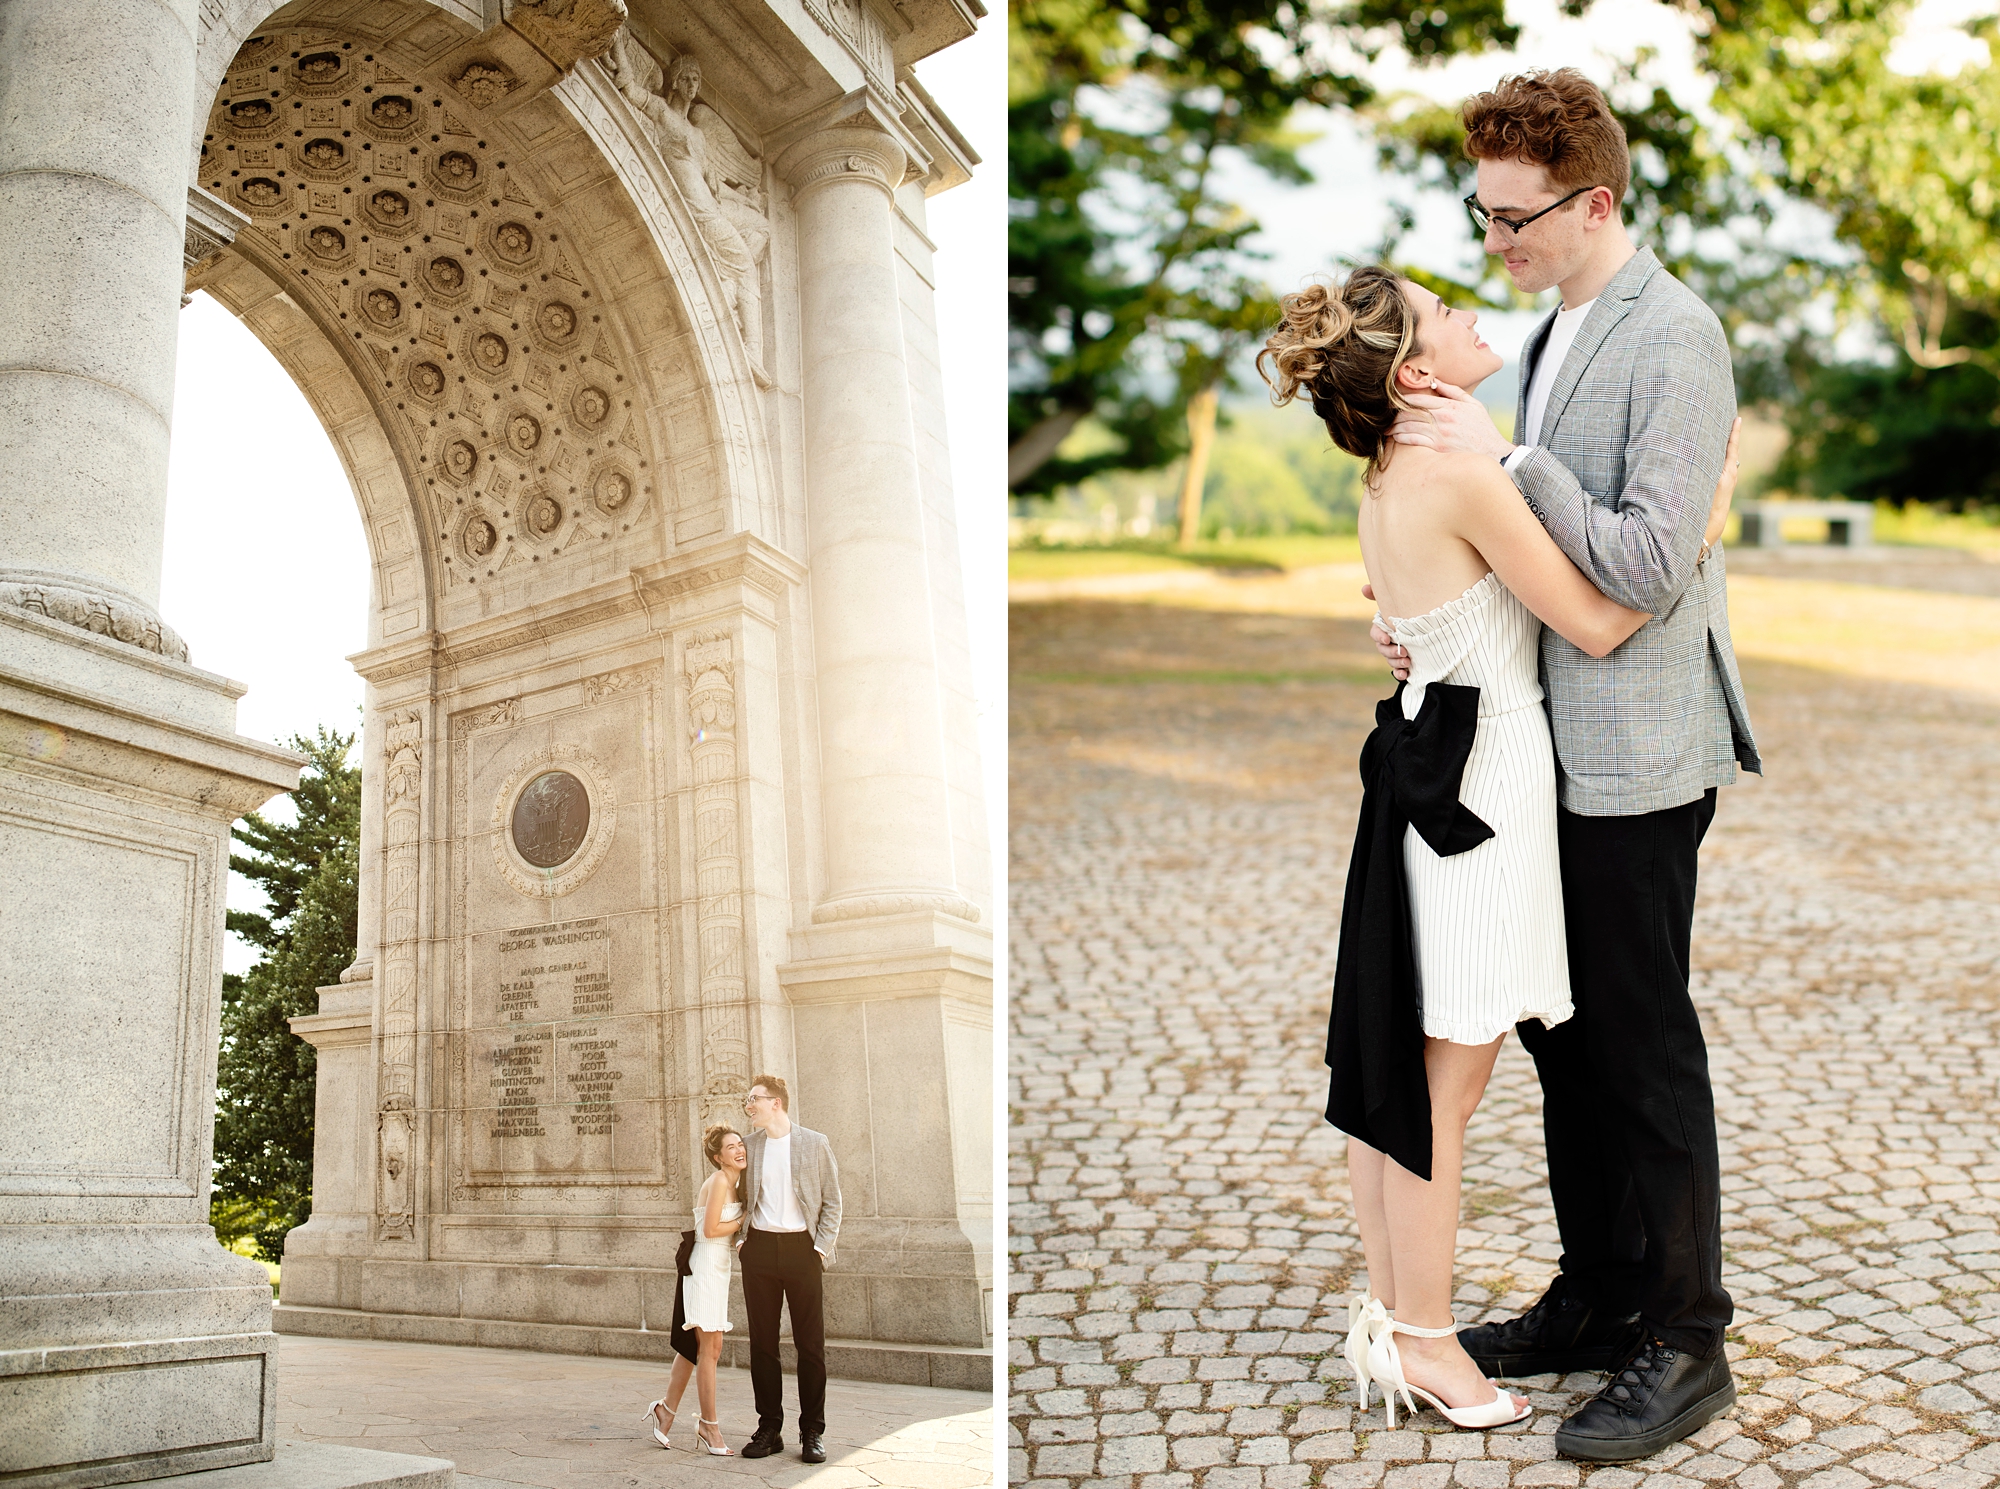 Valley Forge Park Engagement Photos-Philadelphia + Bucks County Pa Wedding and Engagement Photographer-Timeless Summer Engagement Photos in Valley Forge Park